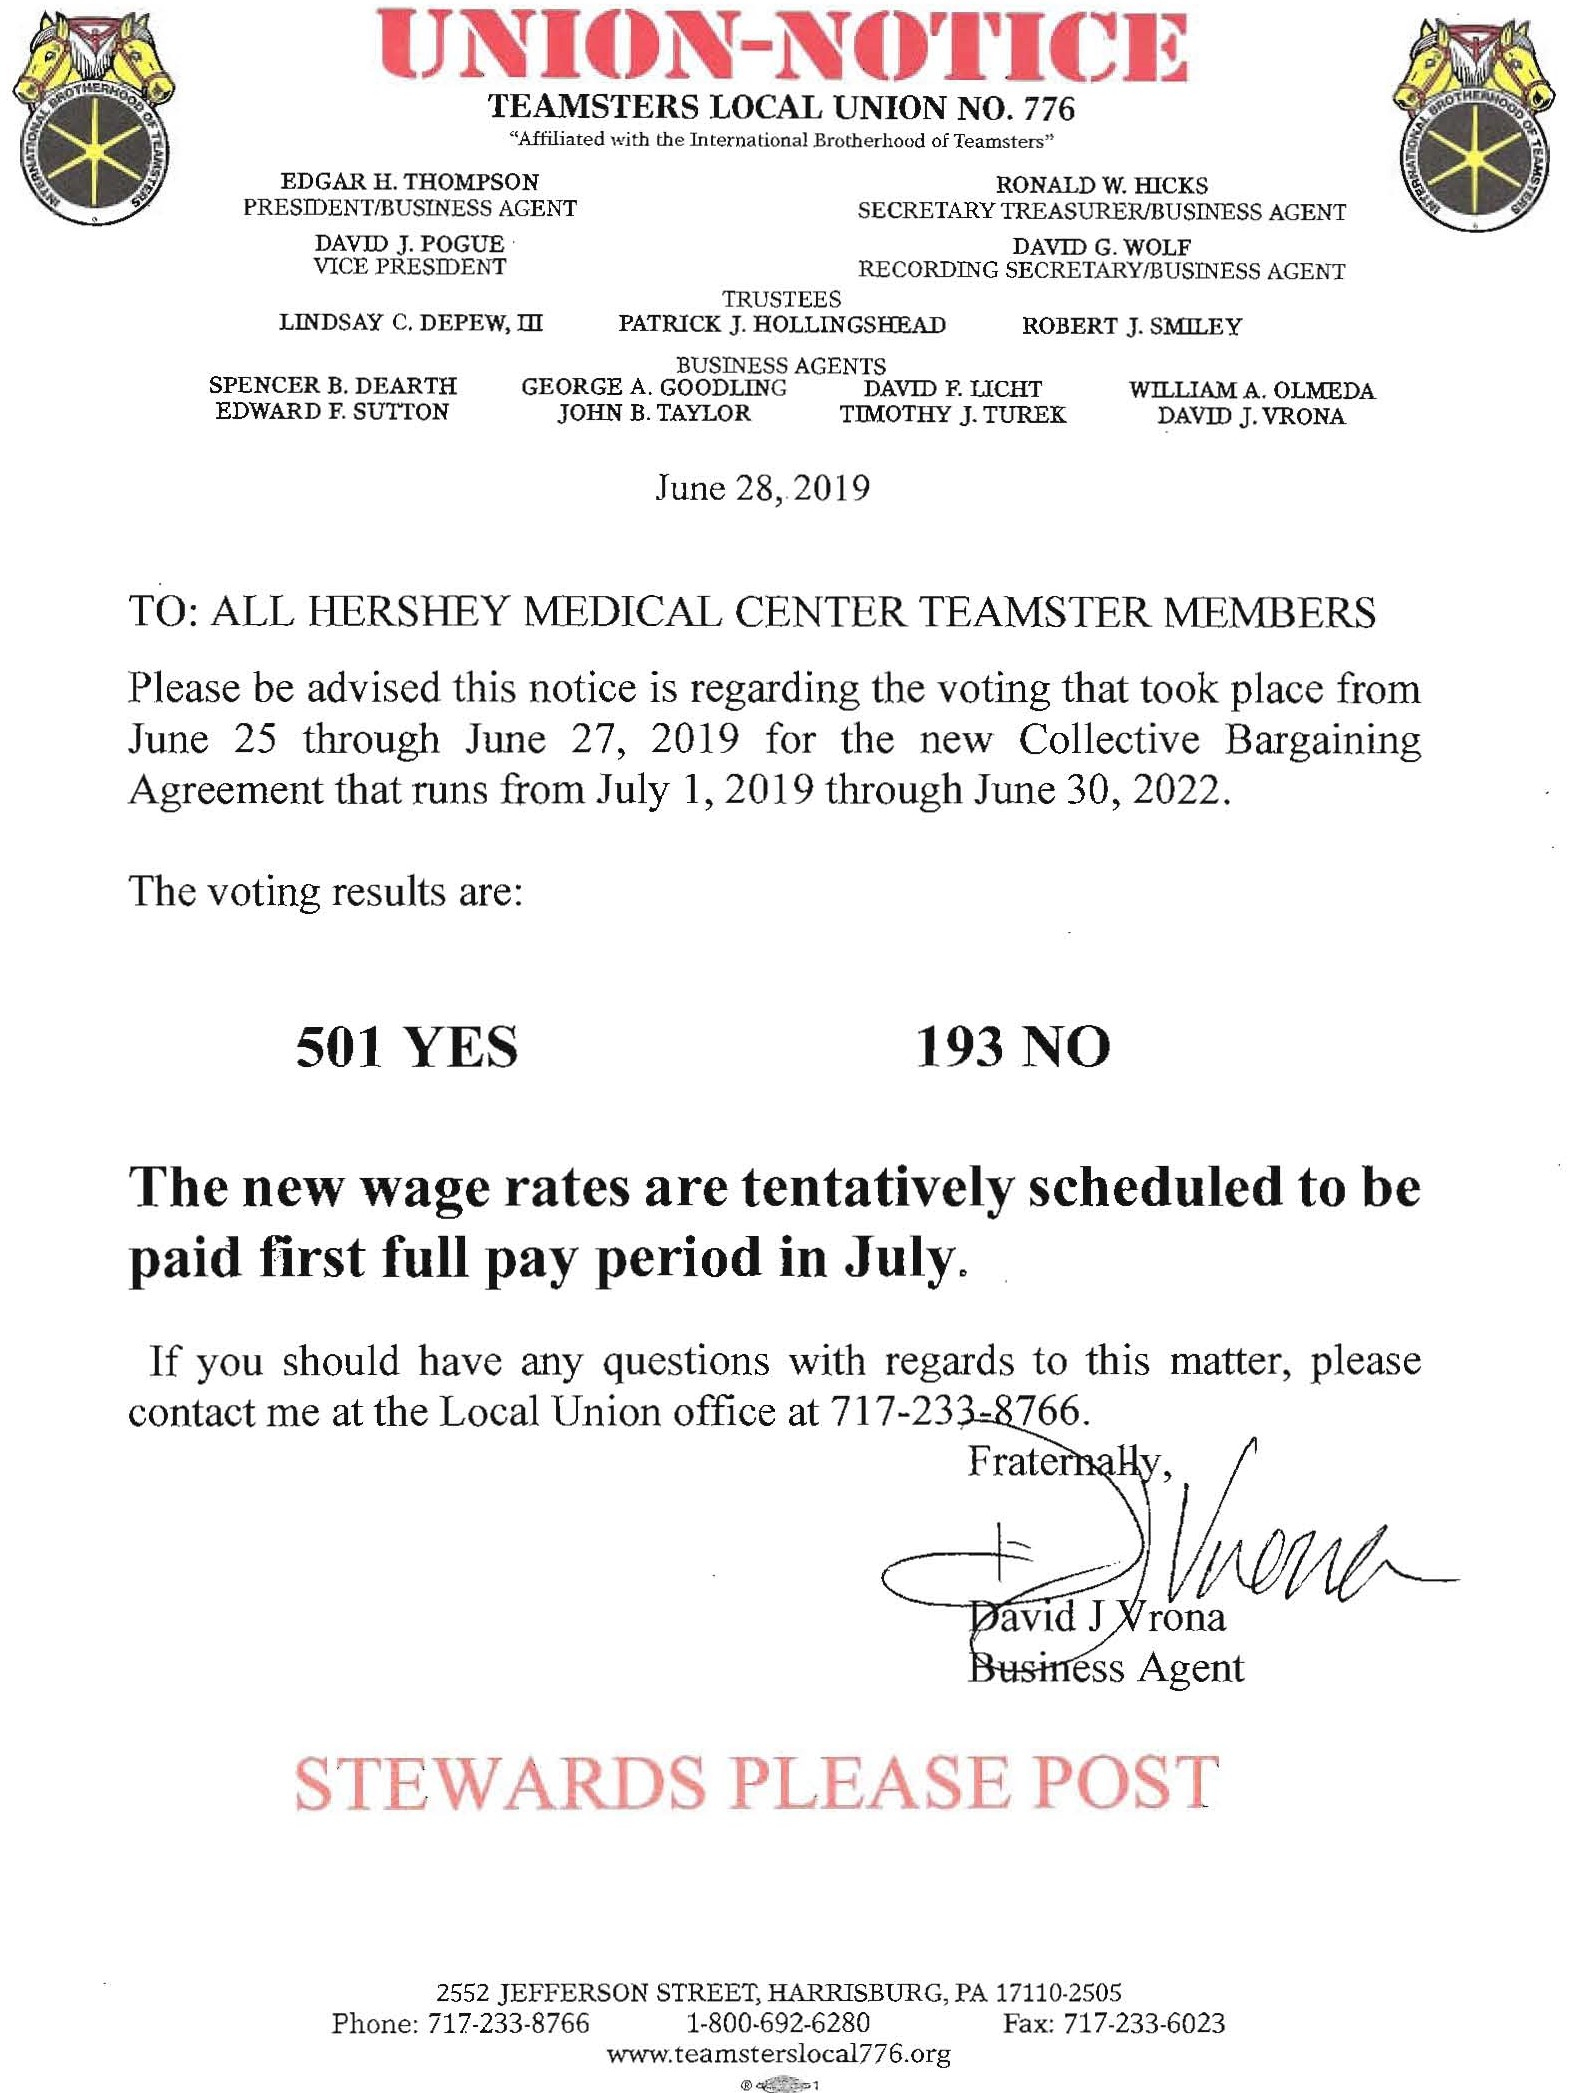 C & F Agent Agreement Teamsters Local 776